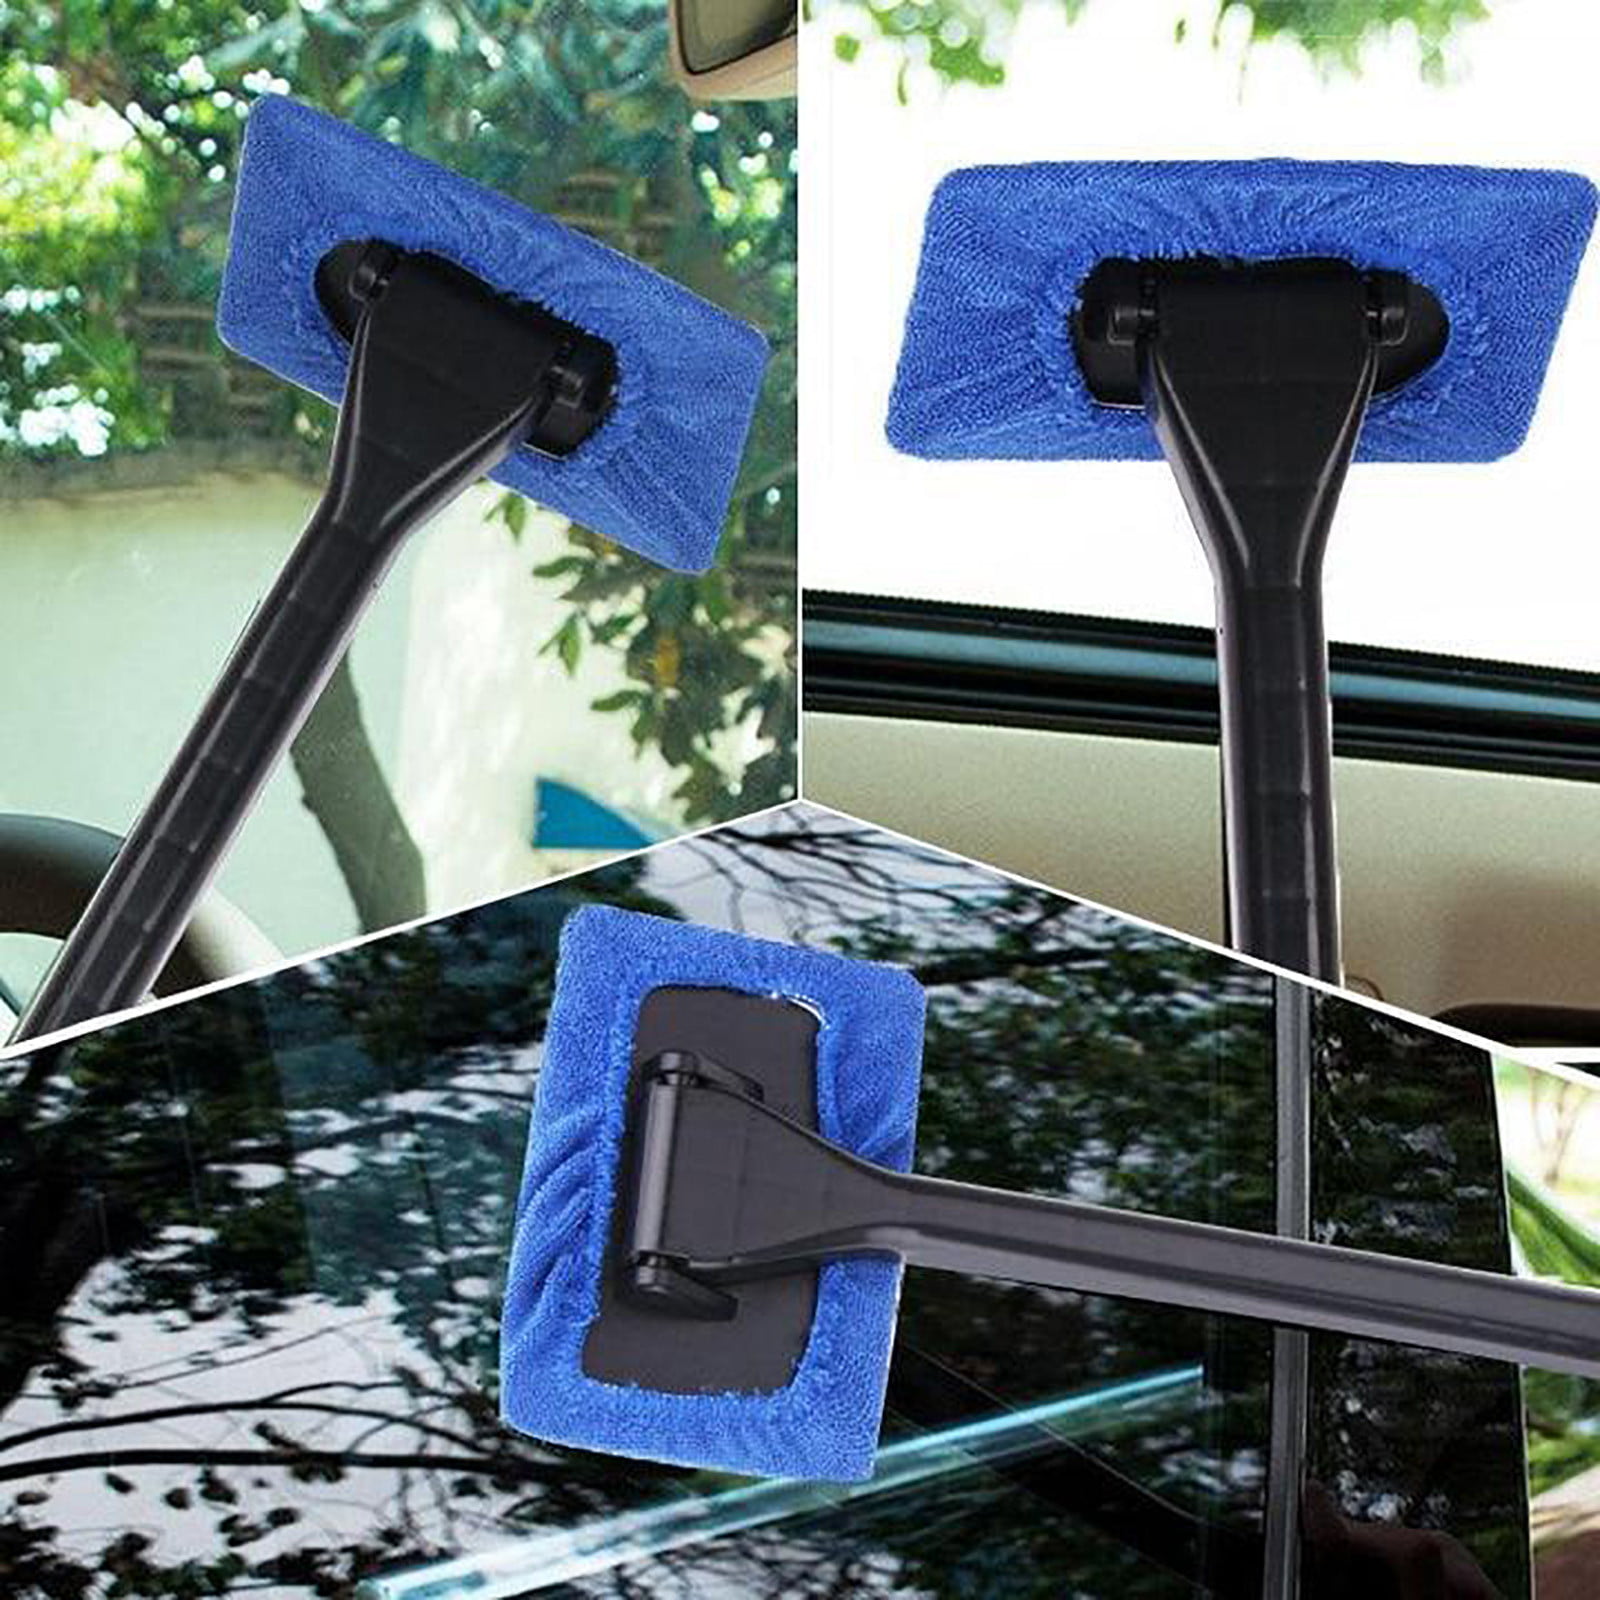  Beieverluck 3 Pieces Windshield Cleaner Tool Inside Car Window  Cleaning Tool with Extendable Handle, Microfiber Car Windshield Cleaner  with 9 Reusable Microfiber Pads and 3 Spray Bottles for Car Use : Automotive